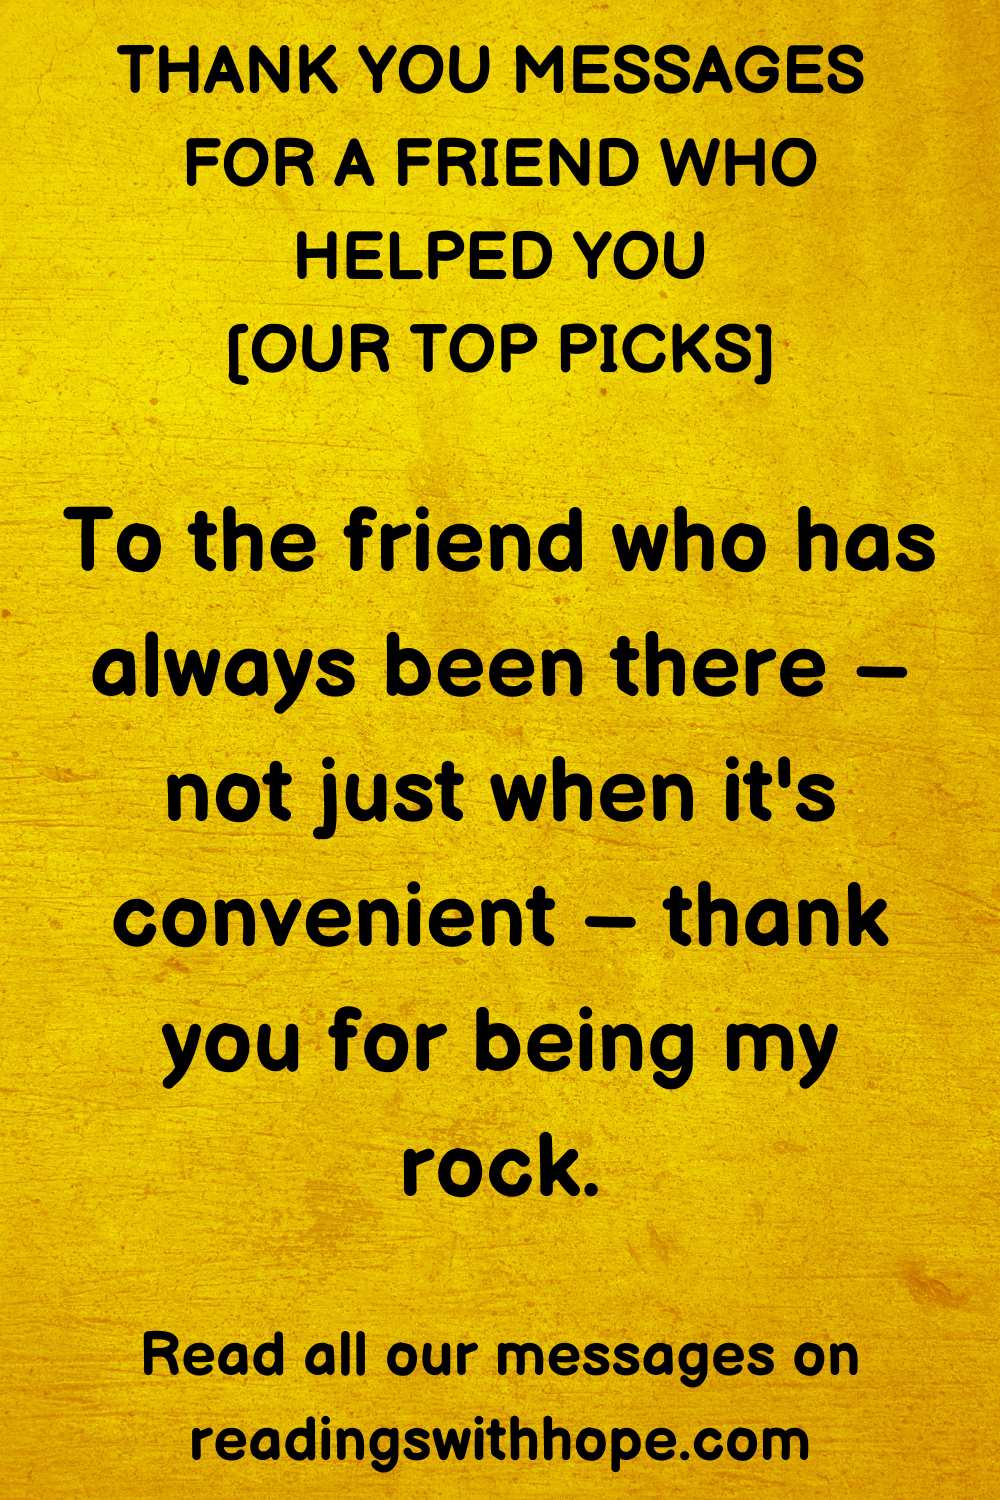 thank you message for a friend who helped you 1